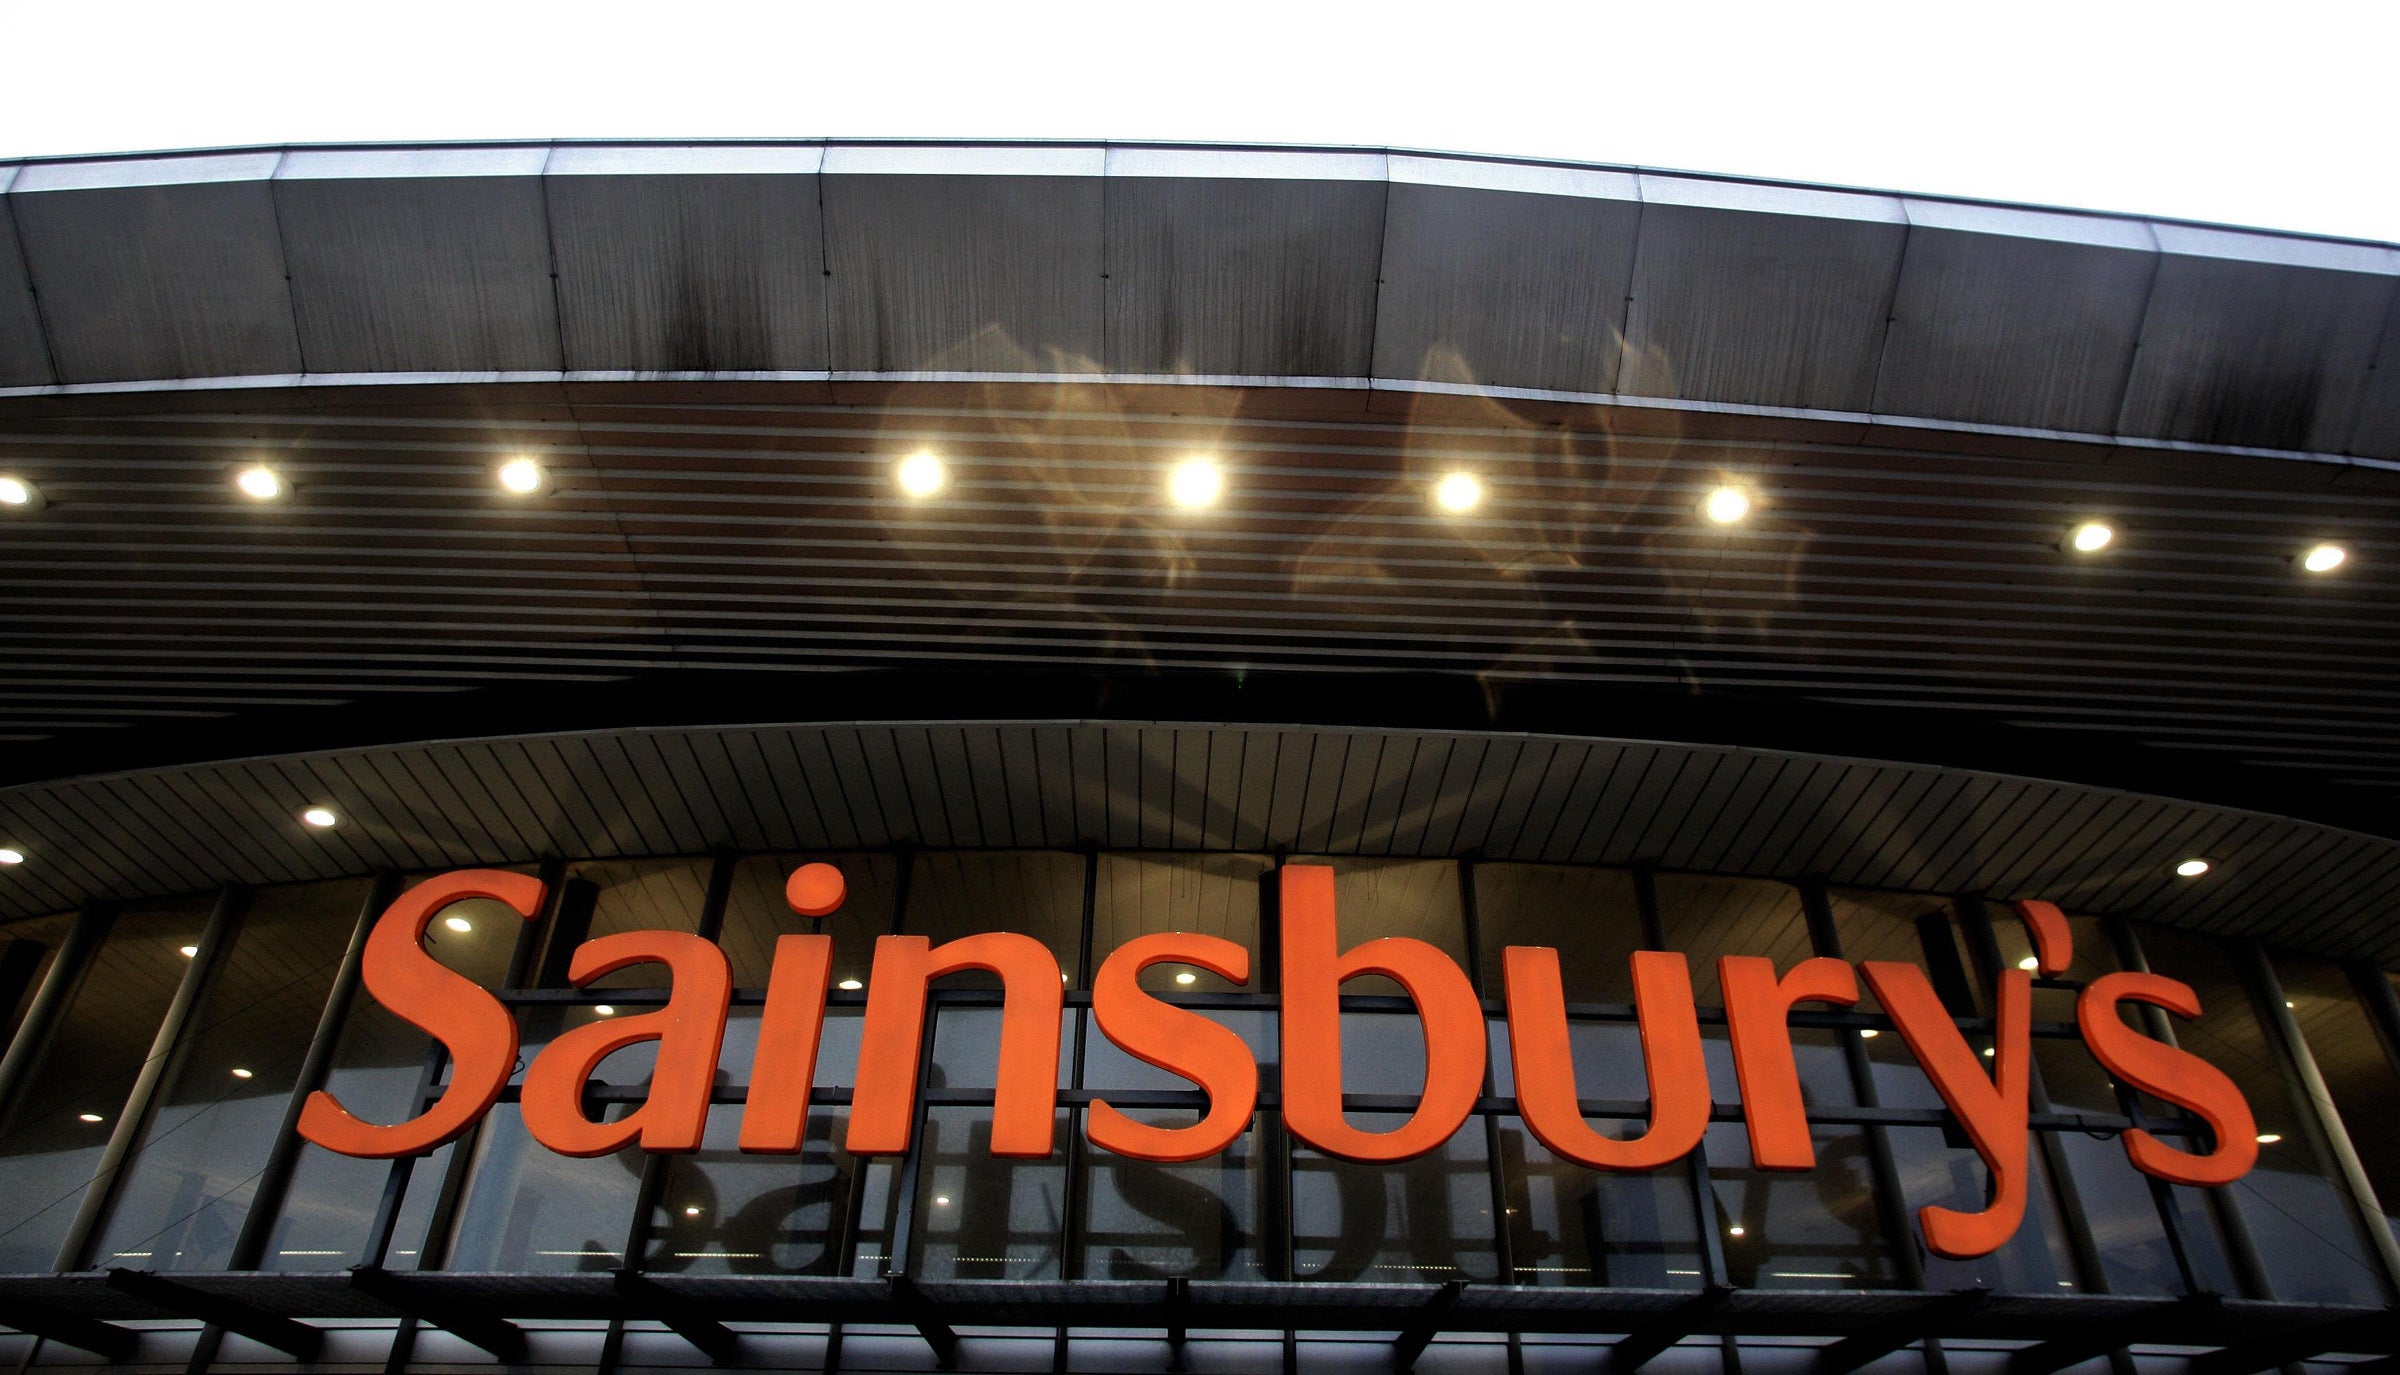 Supermarket Sainsbury’s has agreed a £500 million deal to sell 18 stores to a London-listed real estate investor and then lease them back (PA)